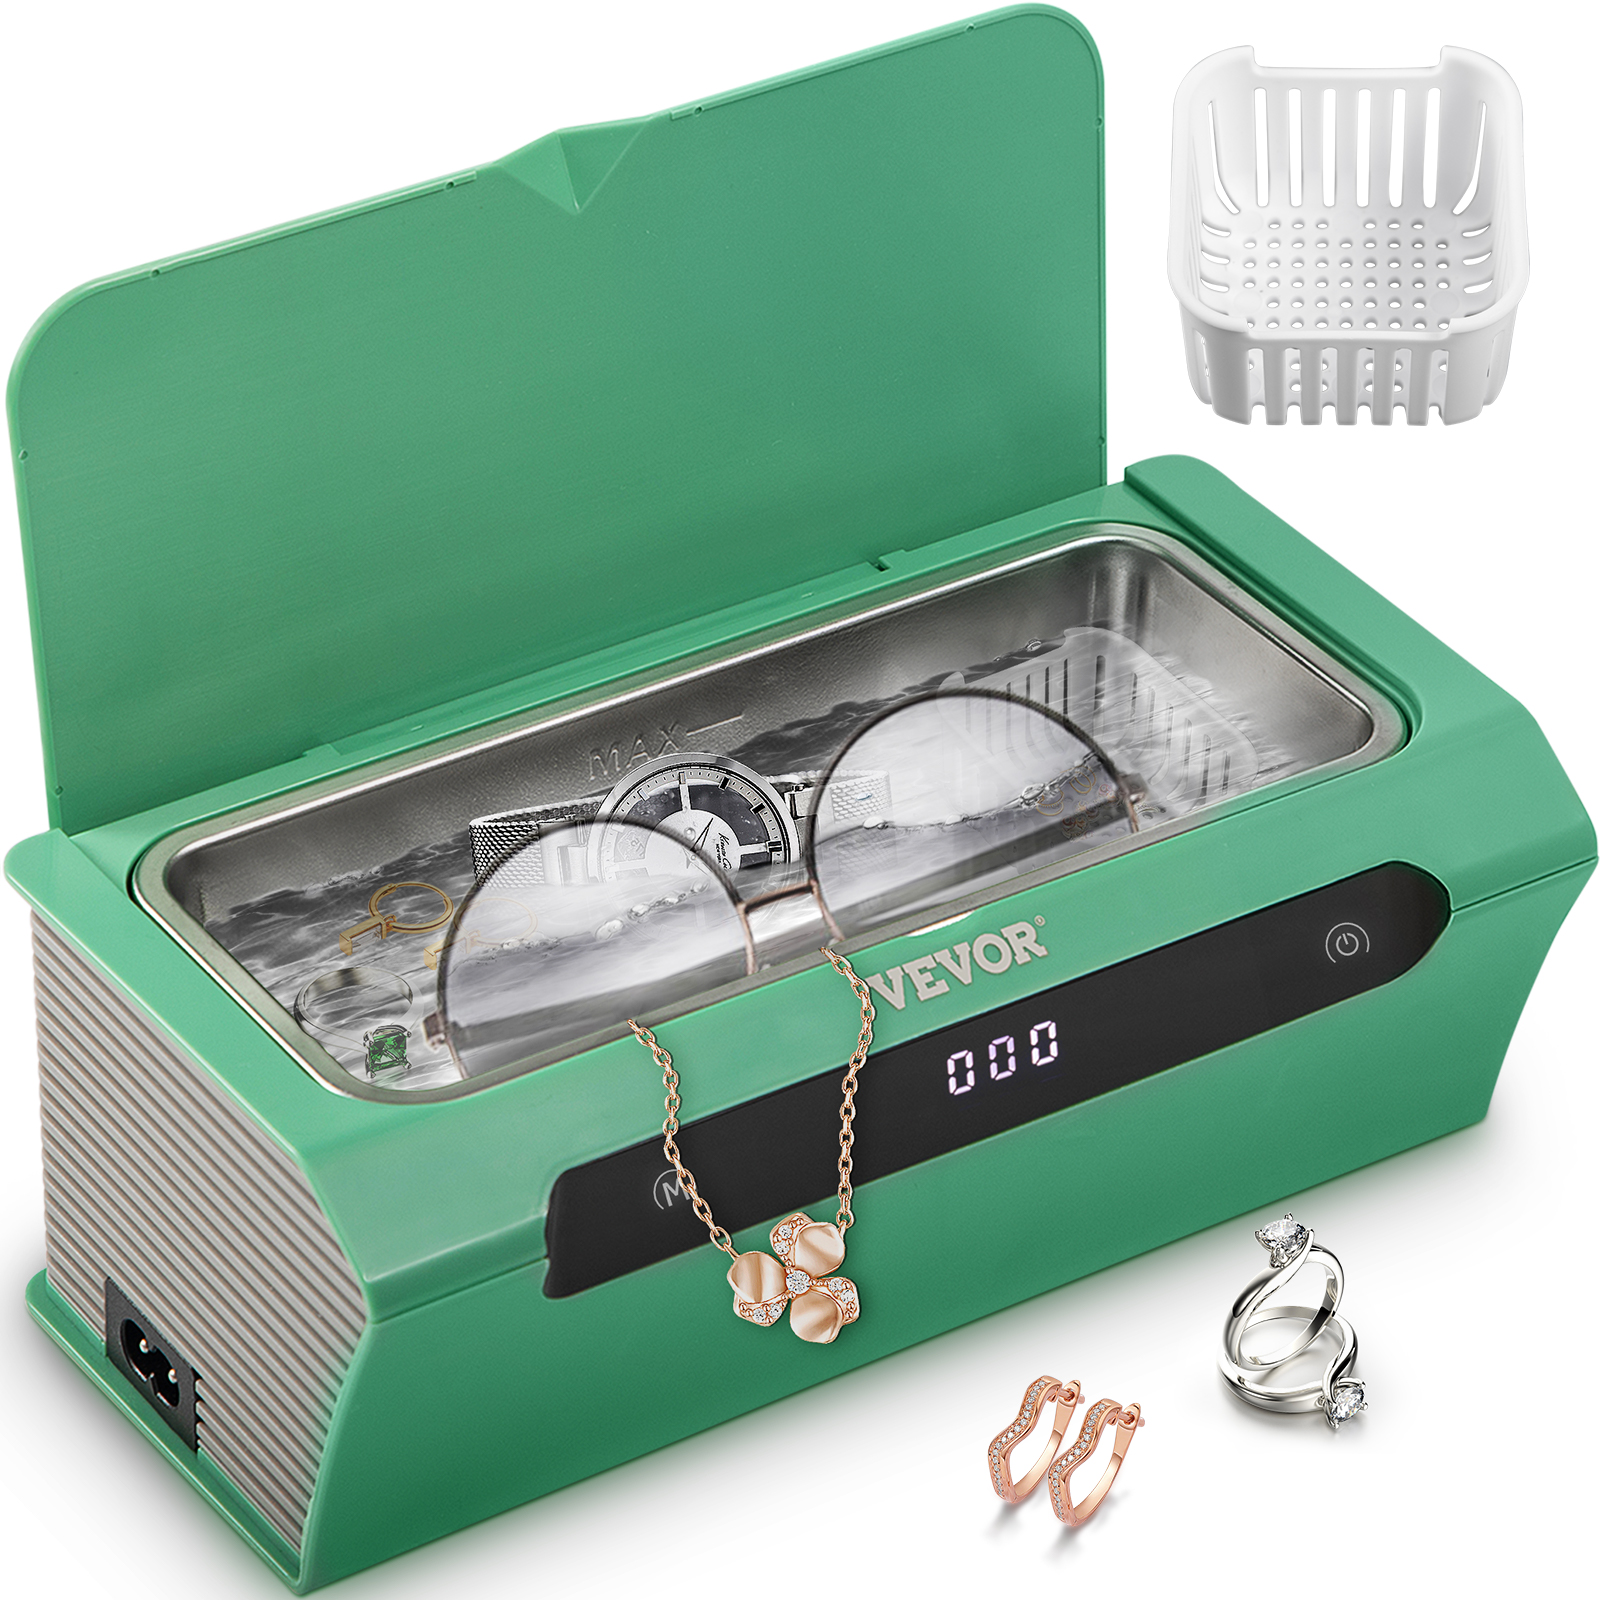 Ultrasonic Cleaner, Jewelry Care Products